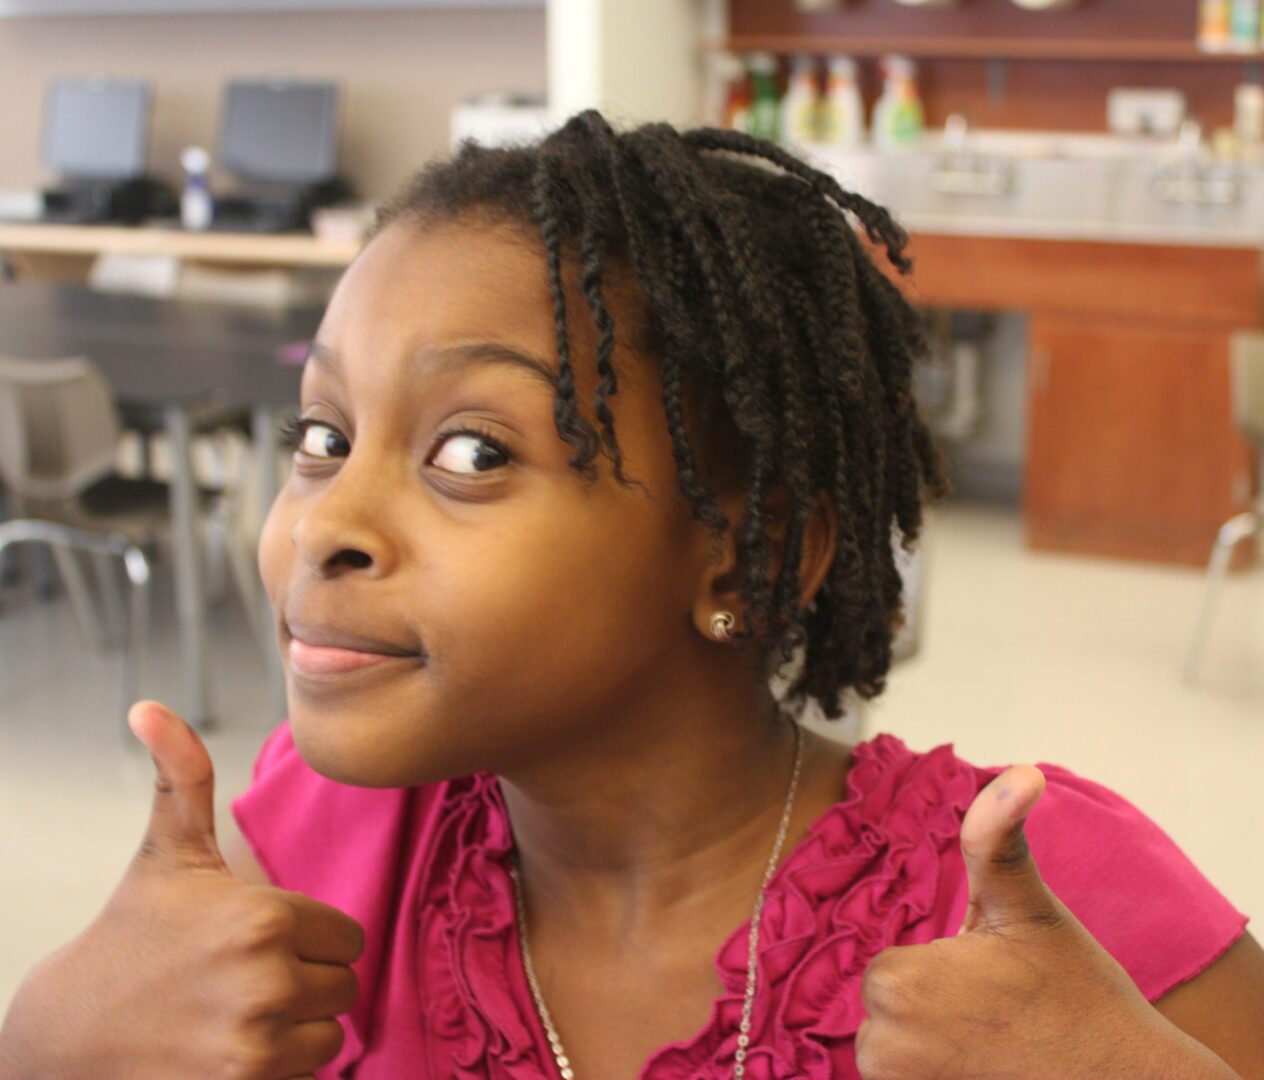 A girl giving a thumbs up.